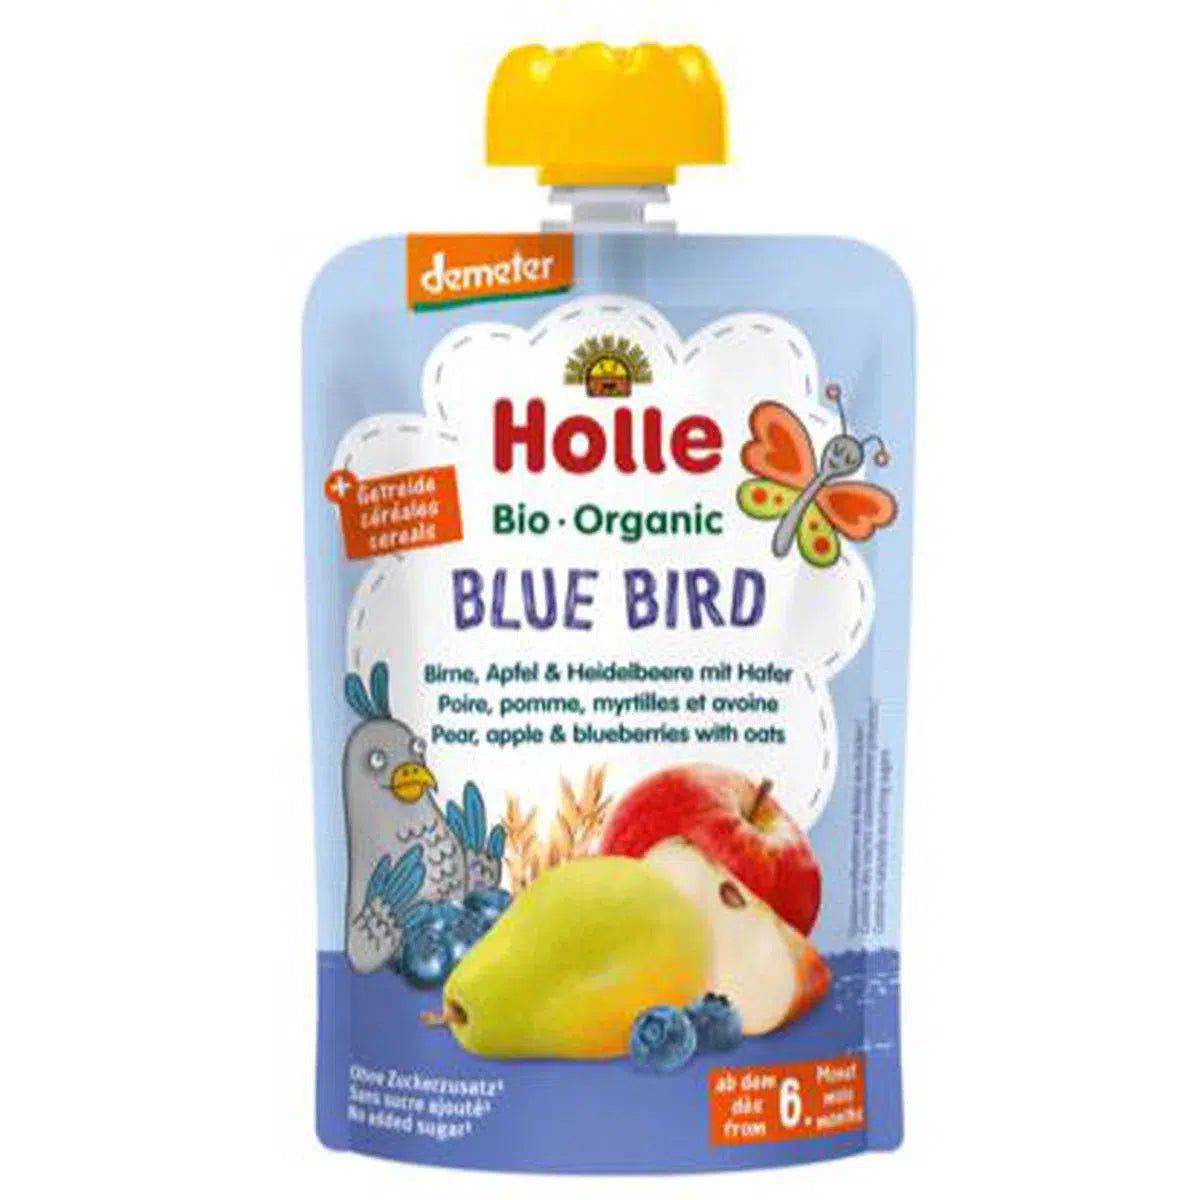 Blue Bird - Pear, Apple & Blueberries with Oats (100g), from 6 months